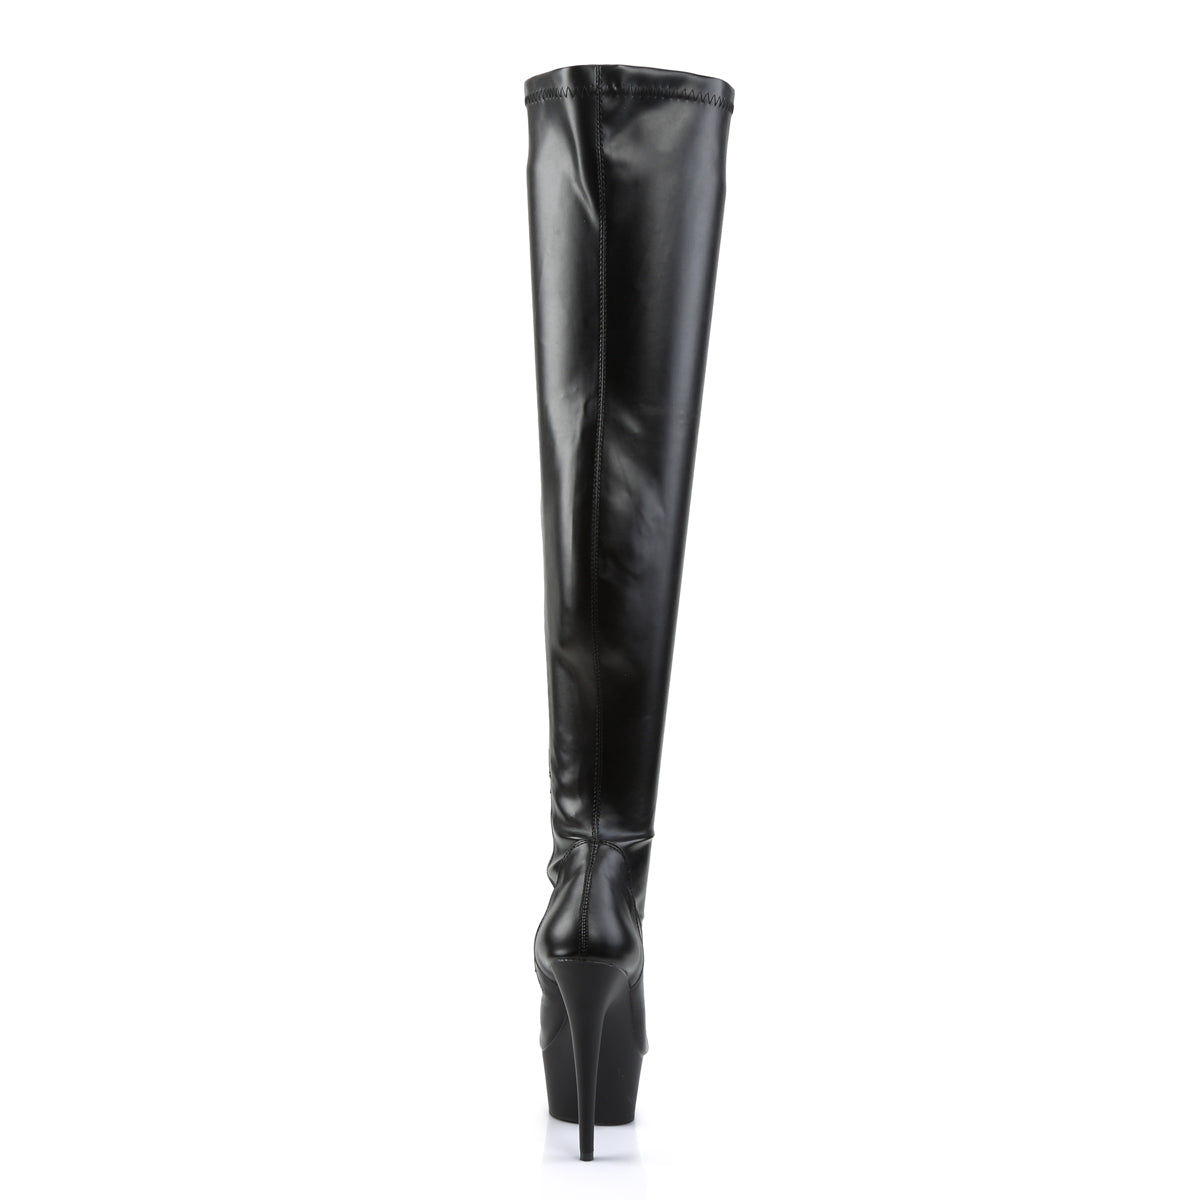 DELIGHT-3000 Black Thigh High Boots